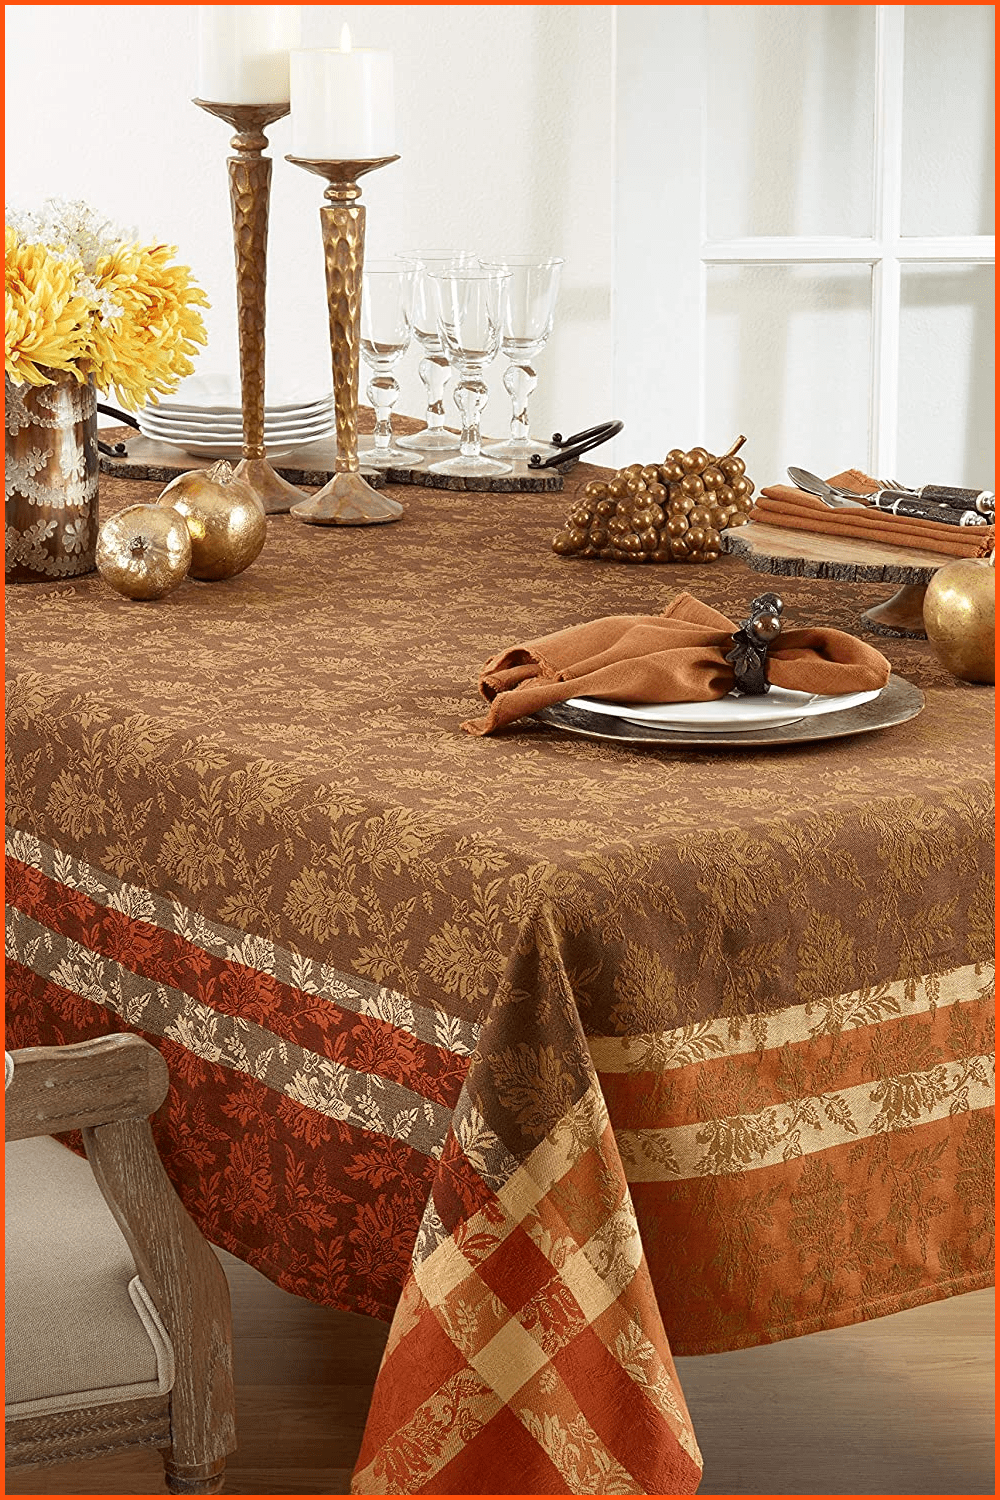 Brown tablecloth on a table with gold decor and white plates.